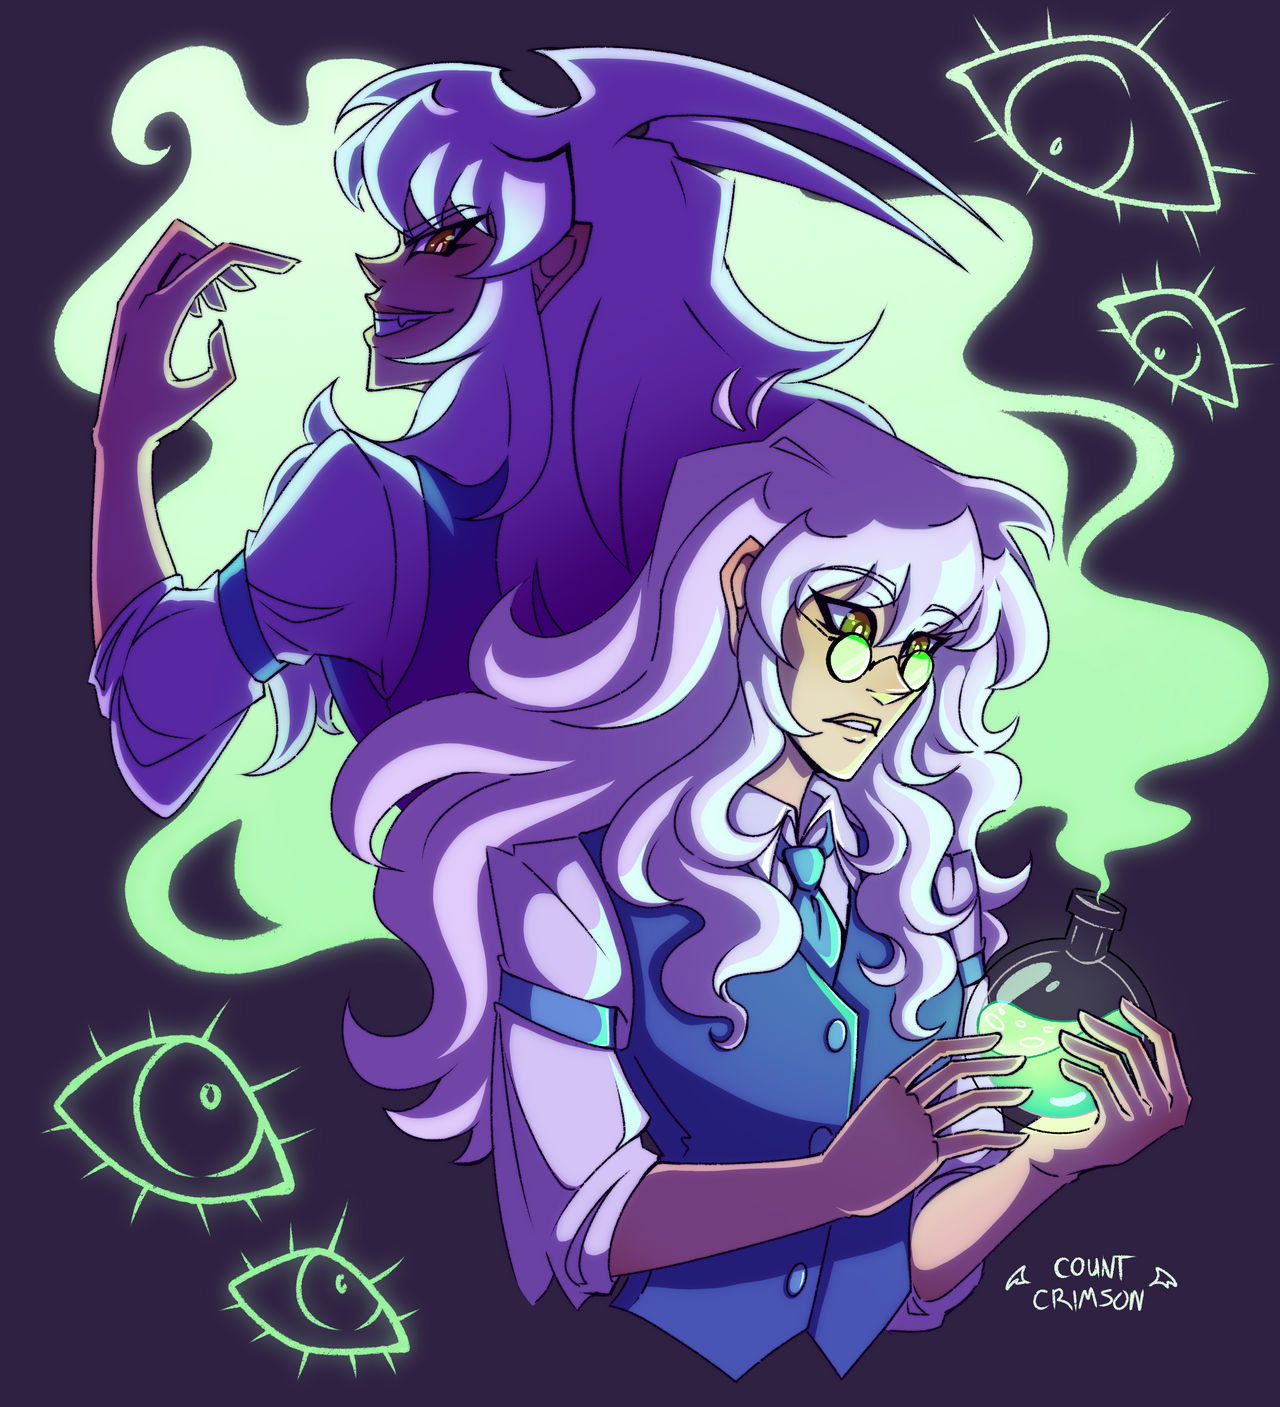 Dr. Ryou and Mr. Bakura by CountXCrimson on DeviantArt